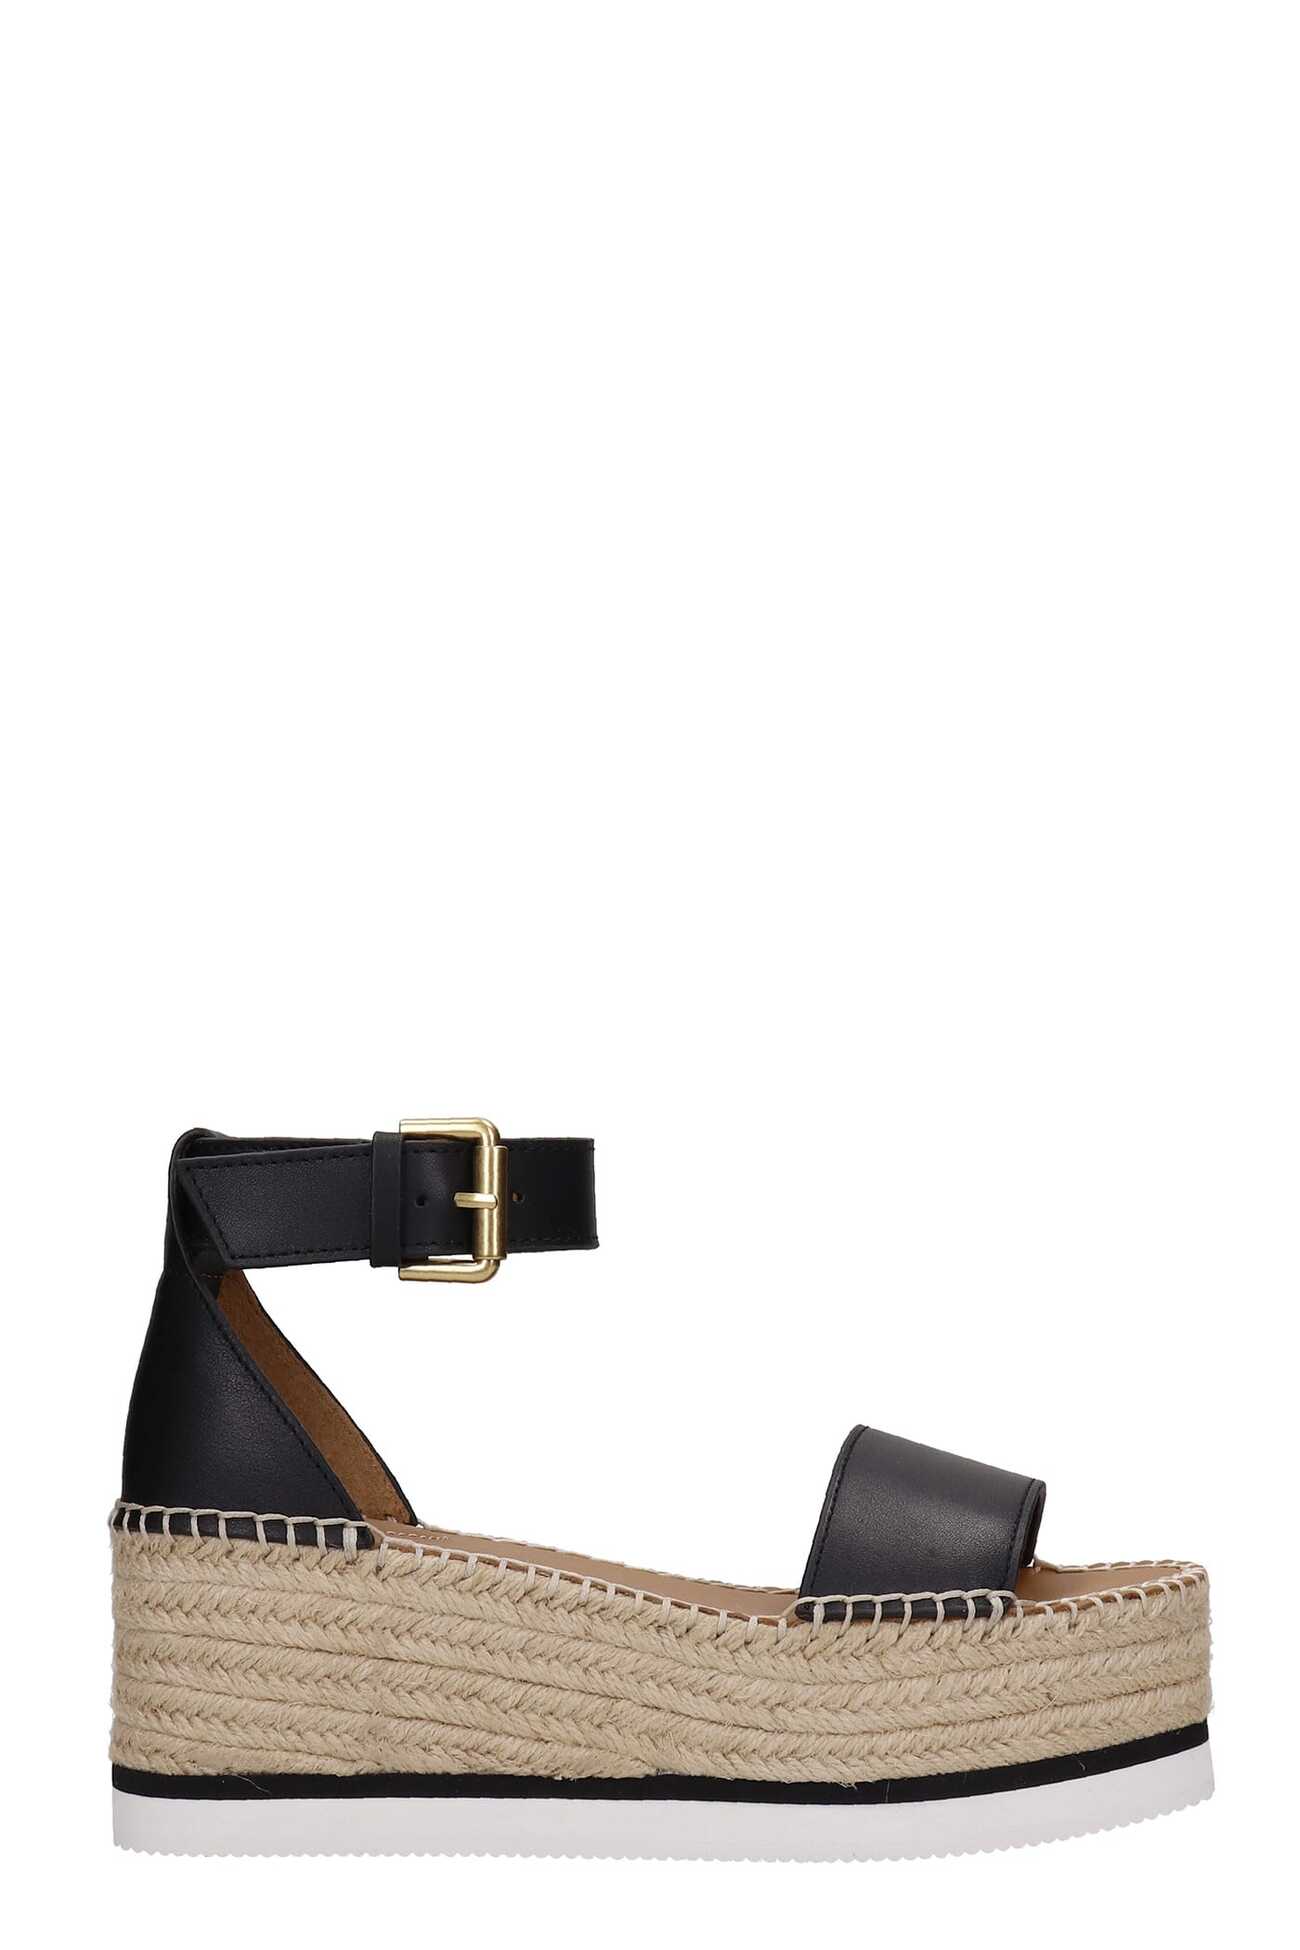 See by Chloé See by Chloé Glyn Wedges In Black Leather